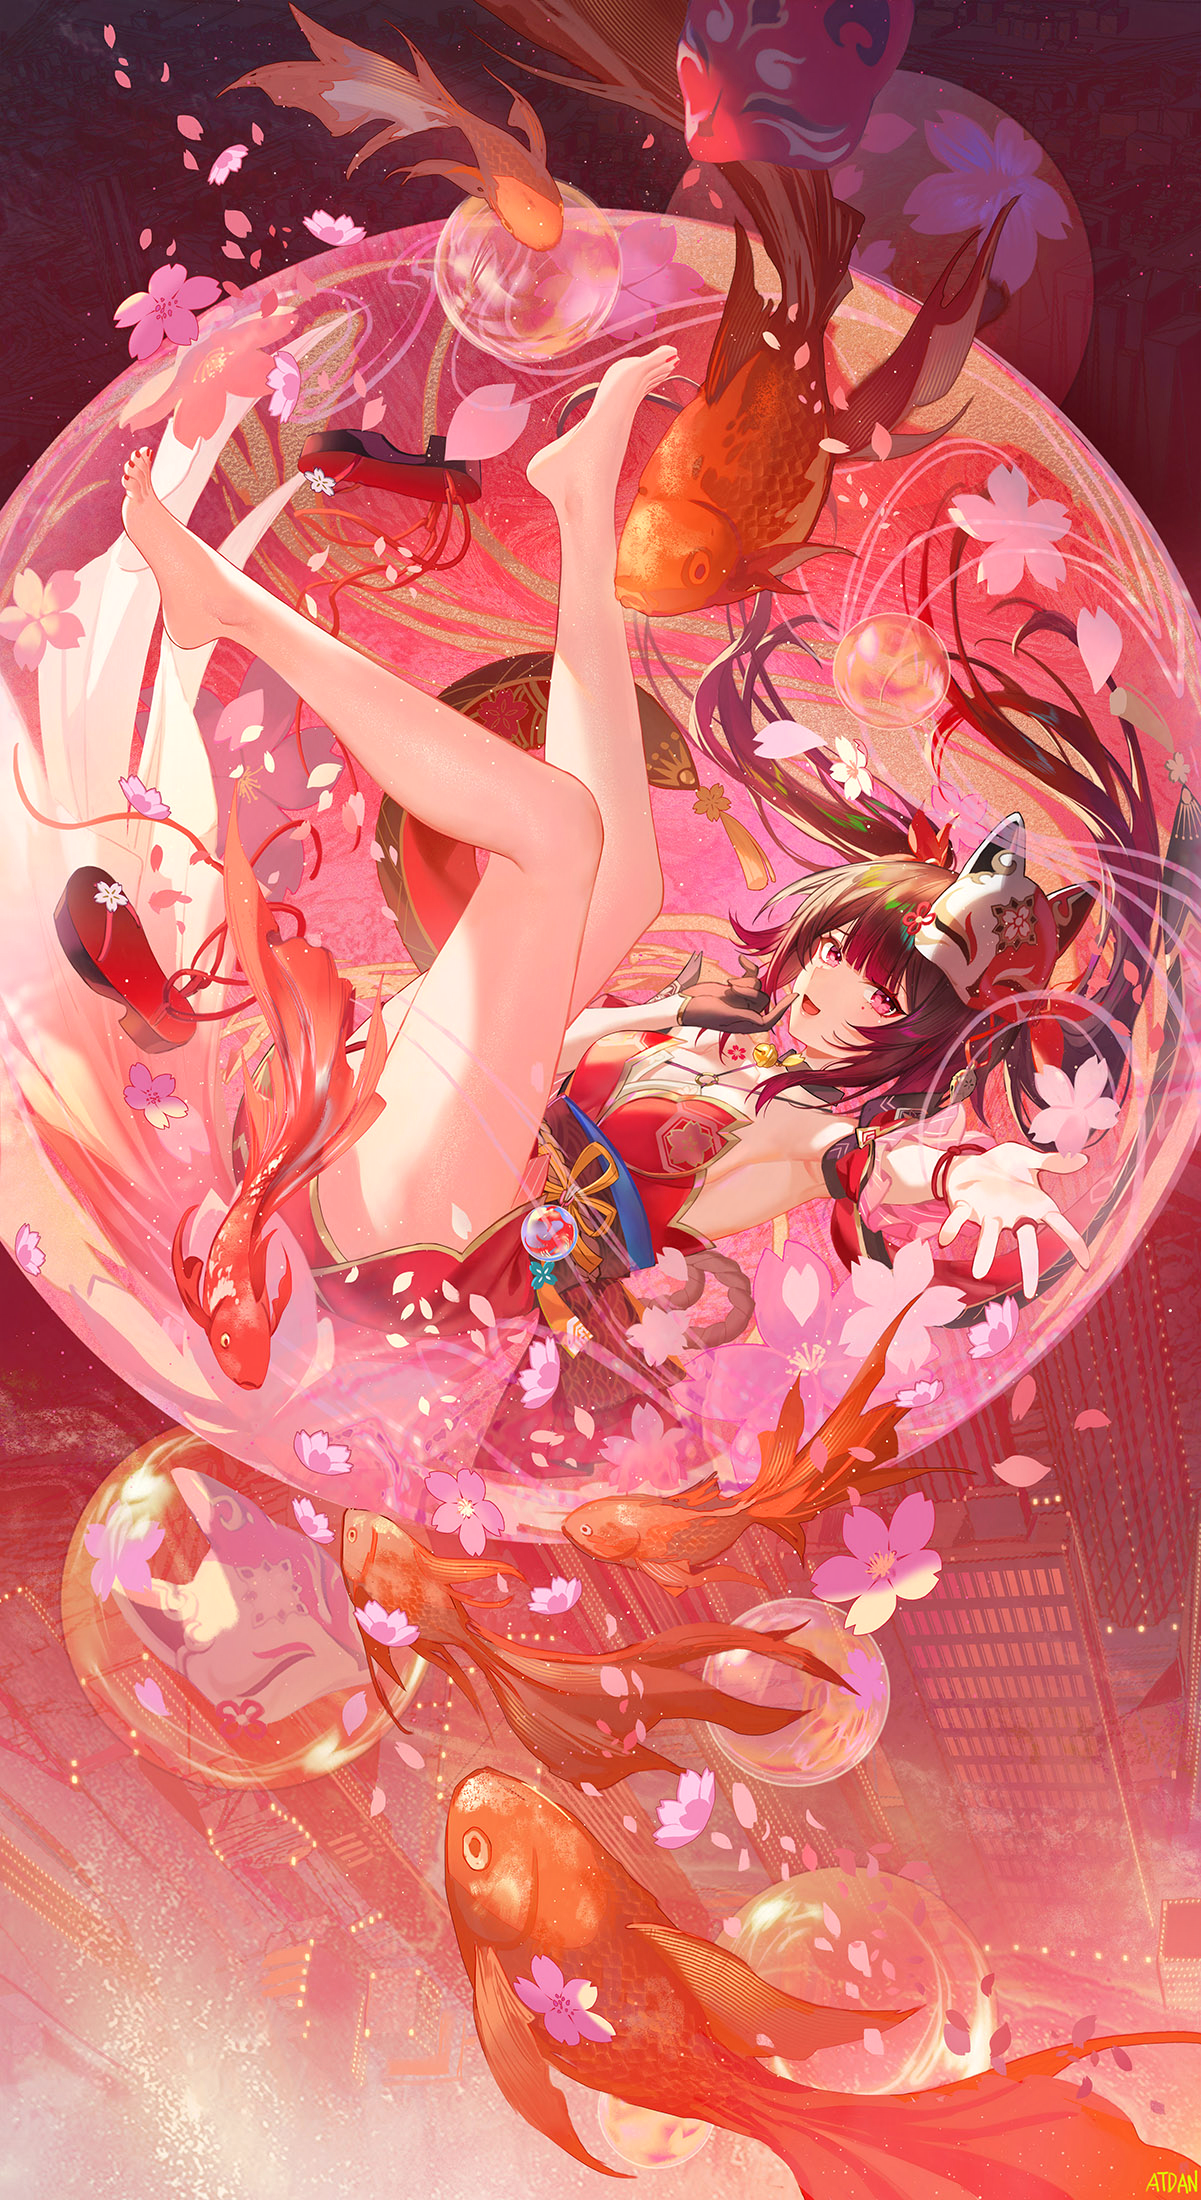 Anime 1201x2200 Honkai: Star Rail artwork Sparkle (Honkai: Star Rail) anime anime girls brunette red eyes twintails kemono long hair fox mask mask goldfish bubbles petals shoes cherry blossom choker portrait display Atdan looking at viewer arms reaching armpits missing glove gloves dress fish tassels pointed toes barefoot foot sole open mouth